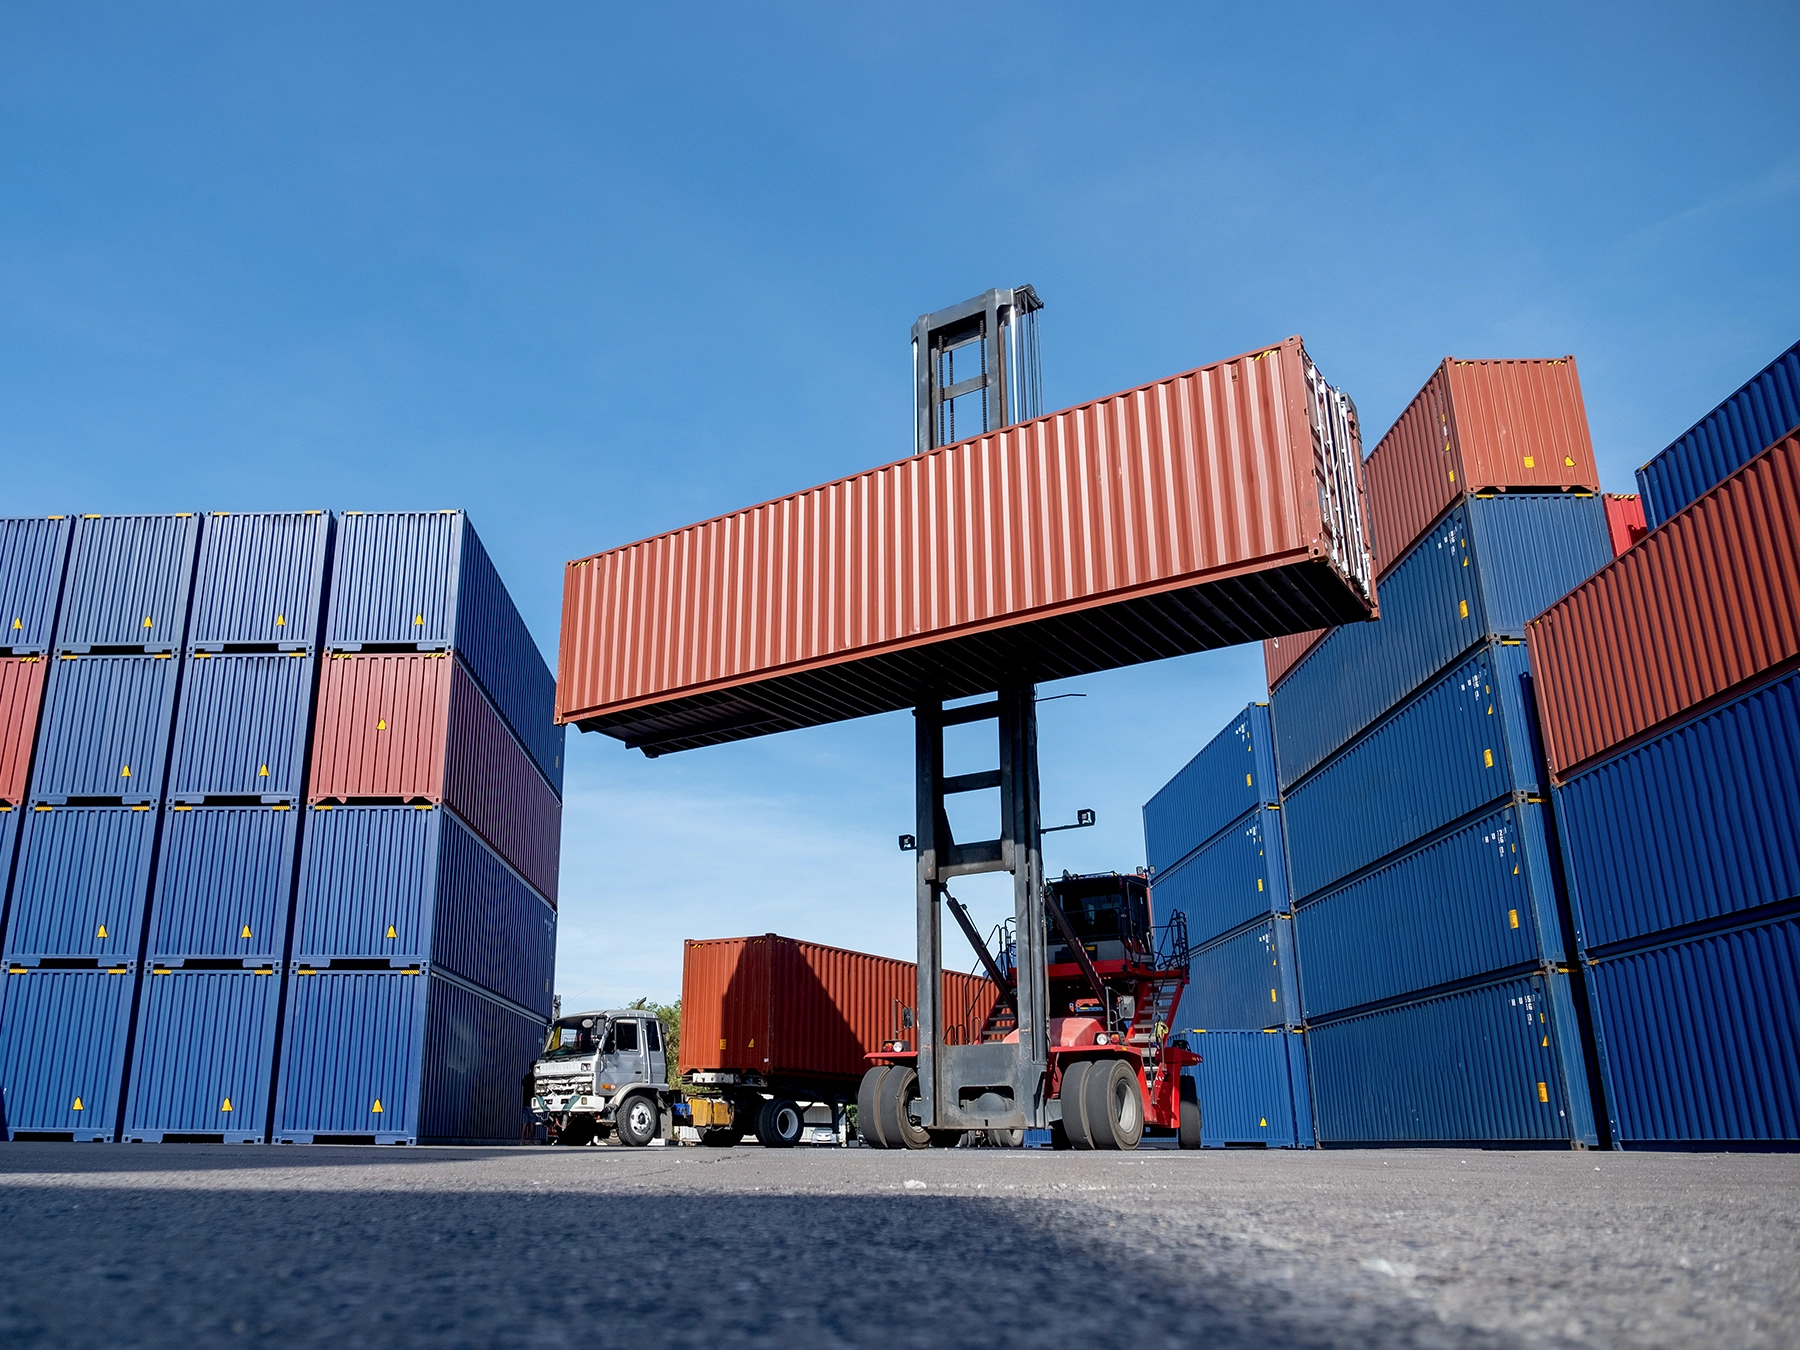 15 Types of Shipping Container Units in Logistics